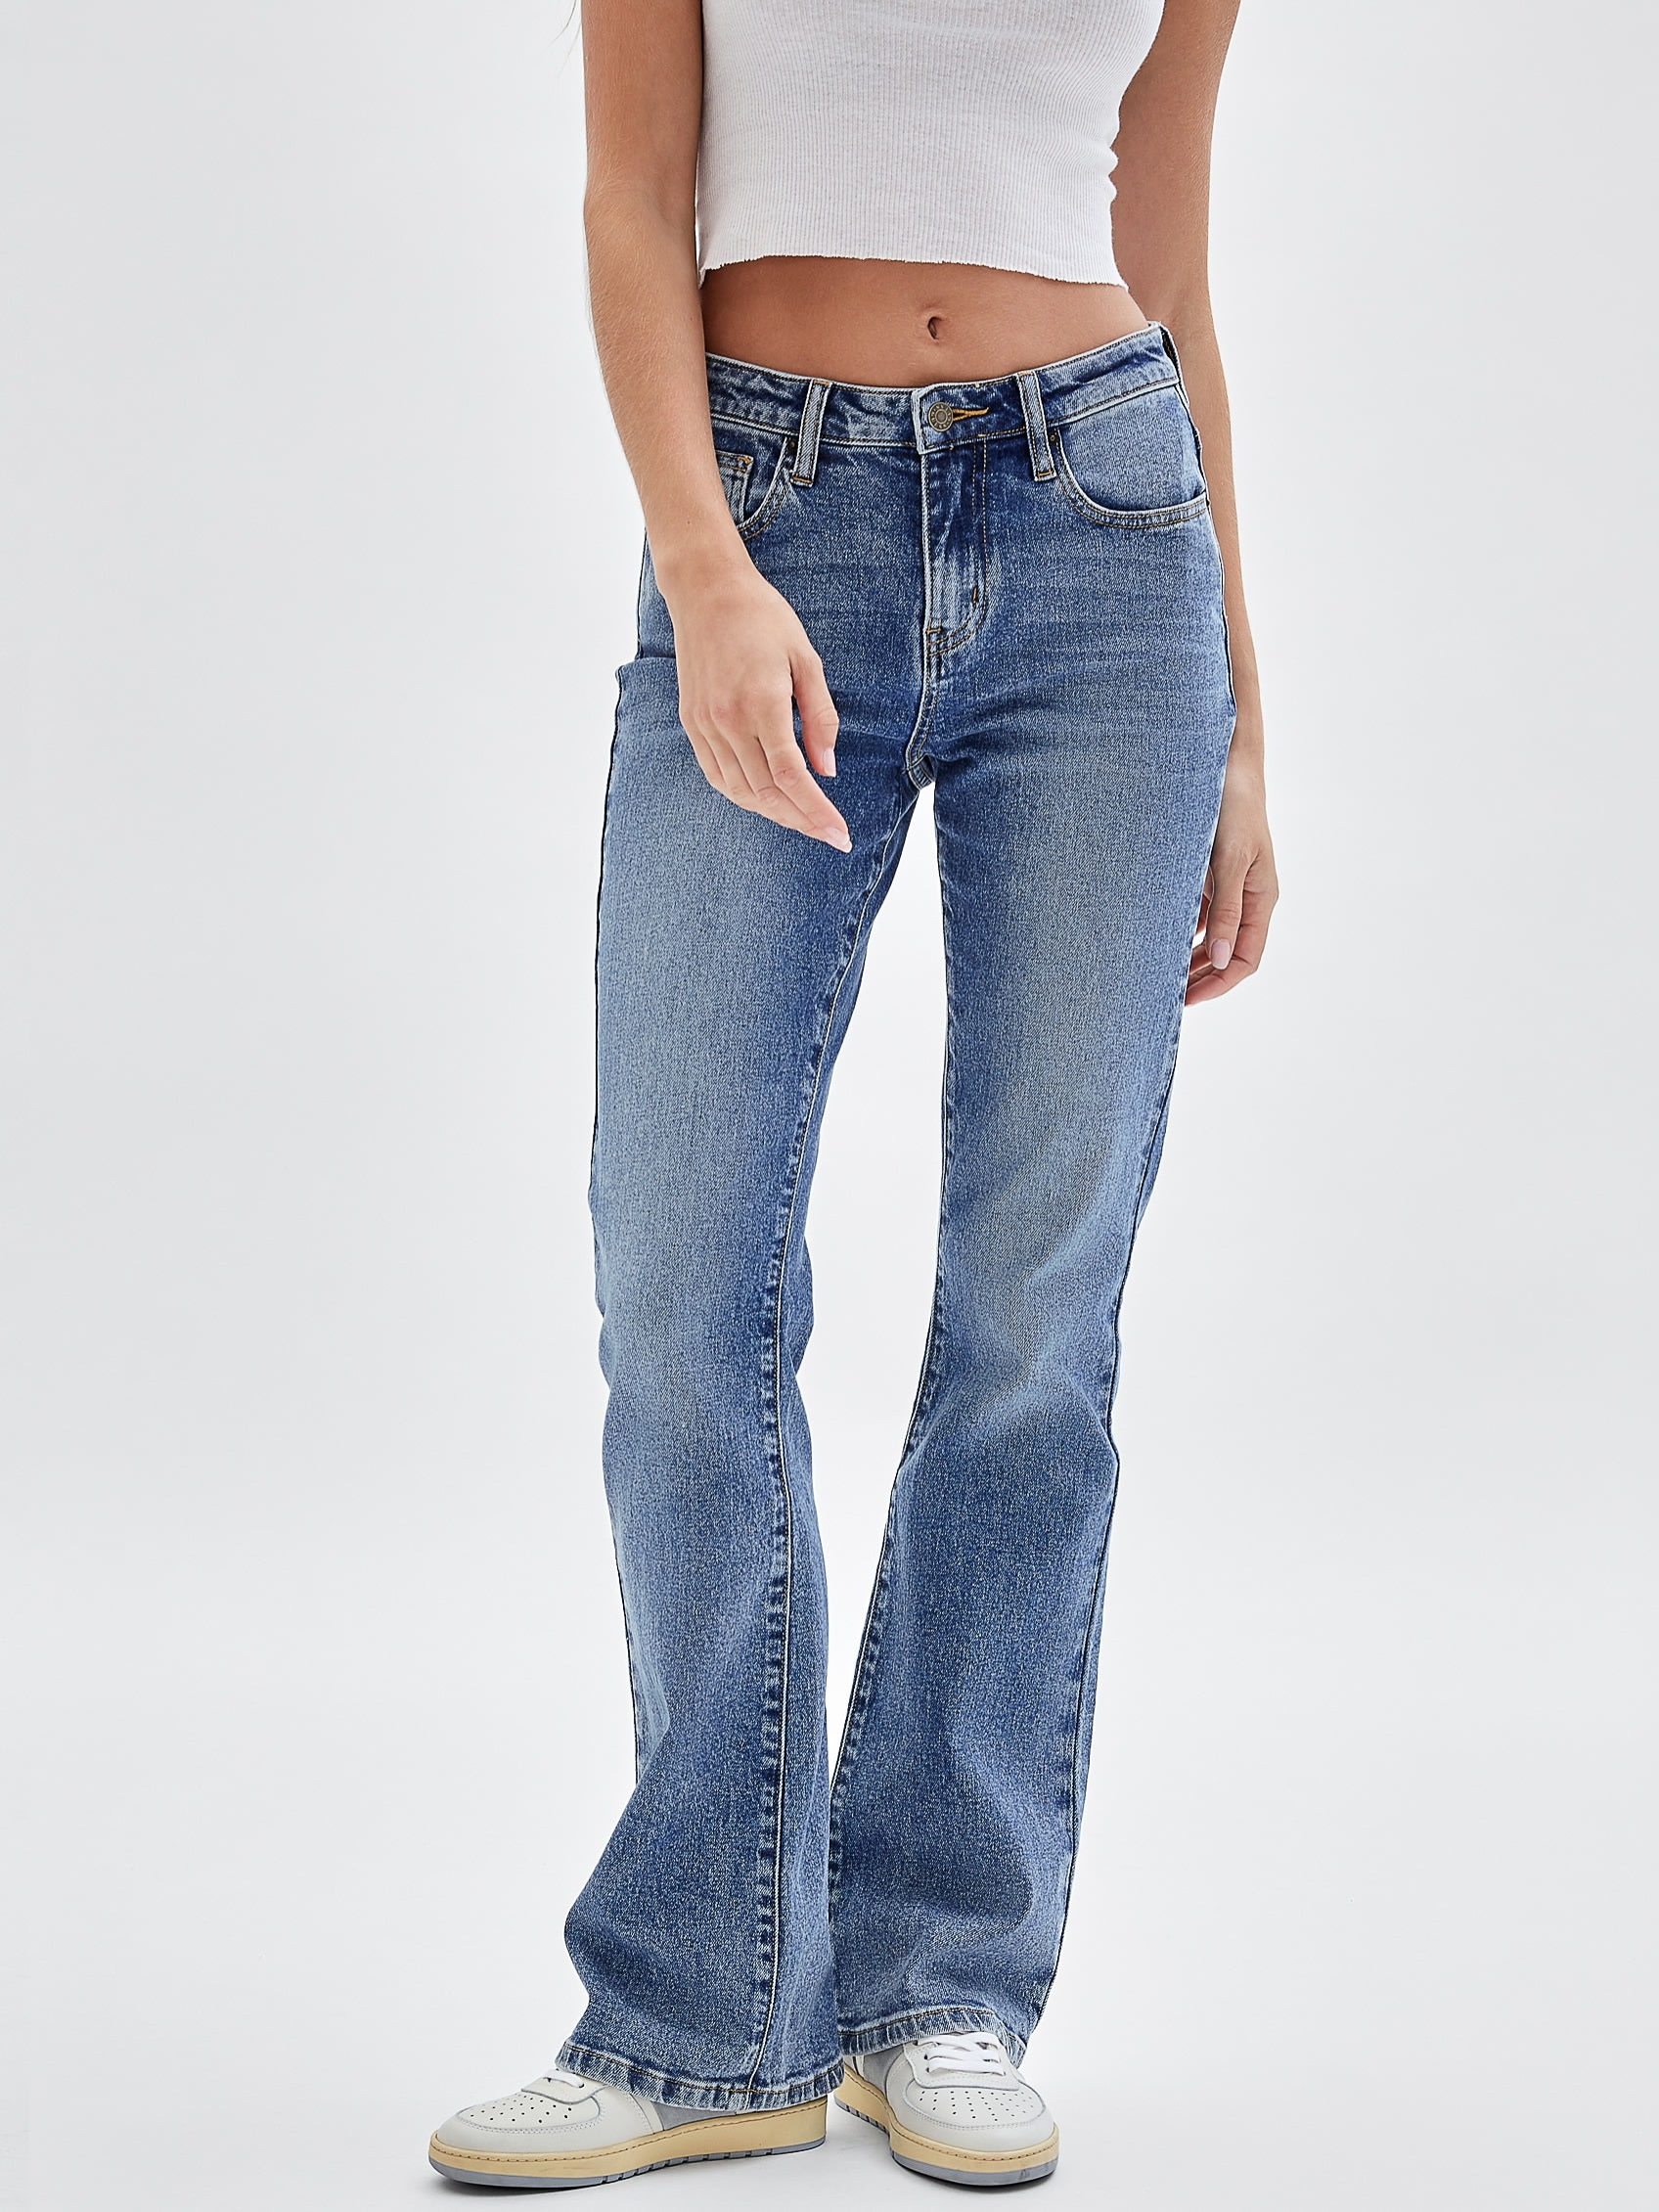 GUESS Originals KIT BOOTCUT PANT | Guess Philippines